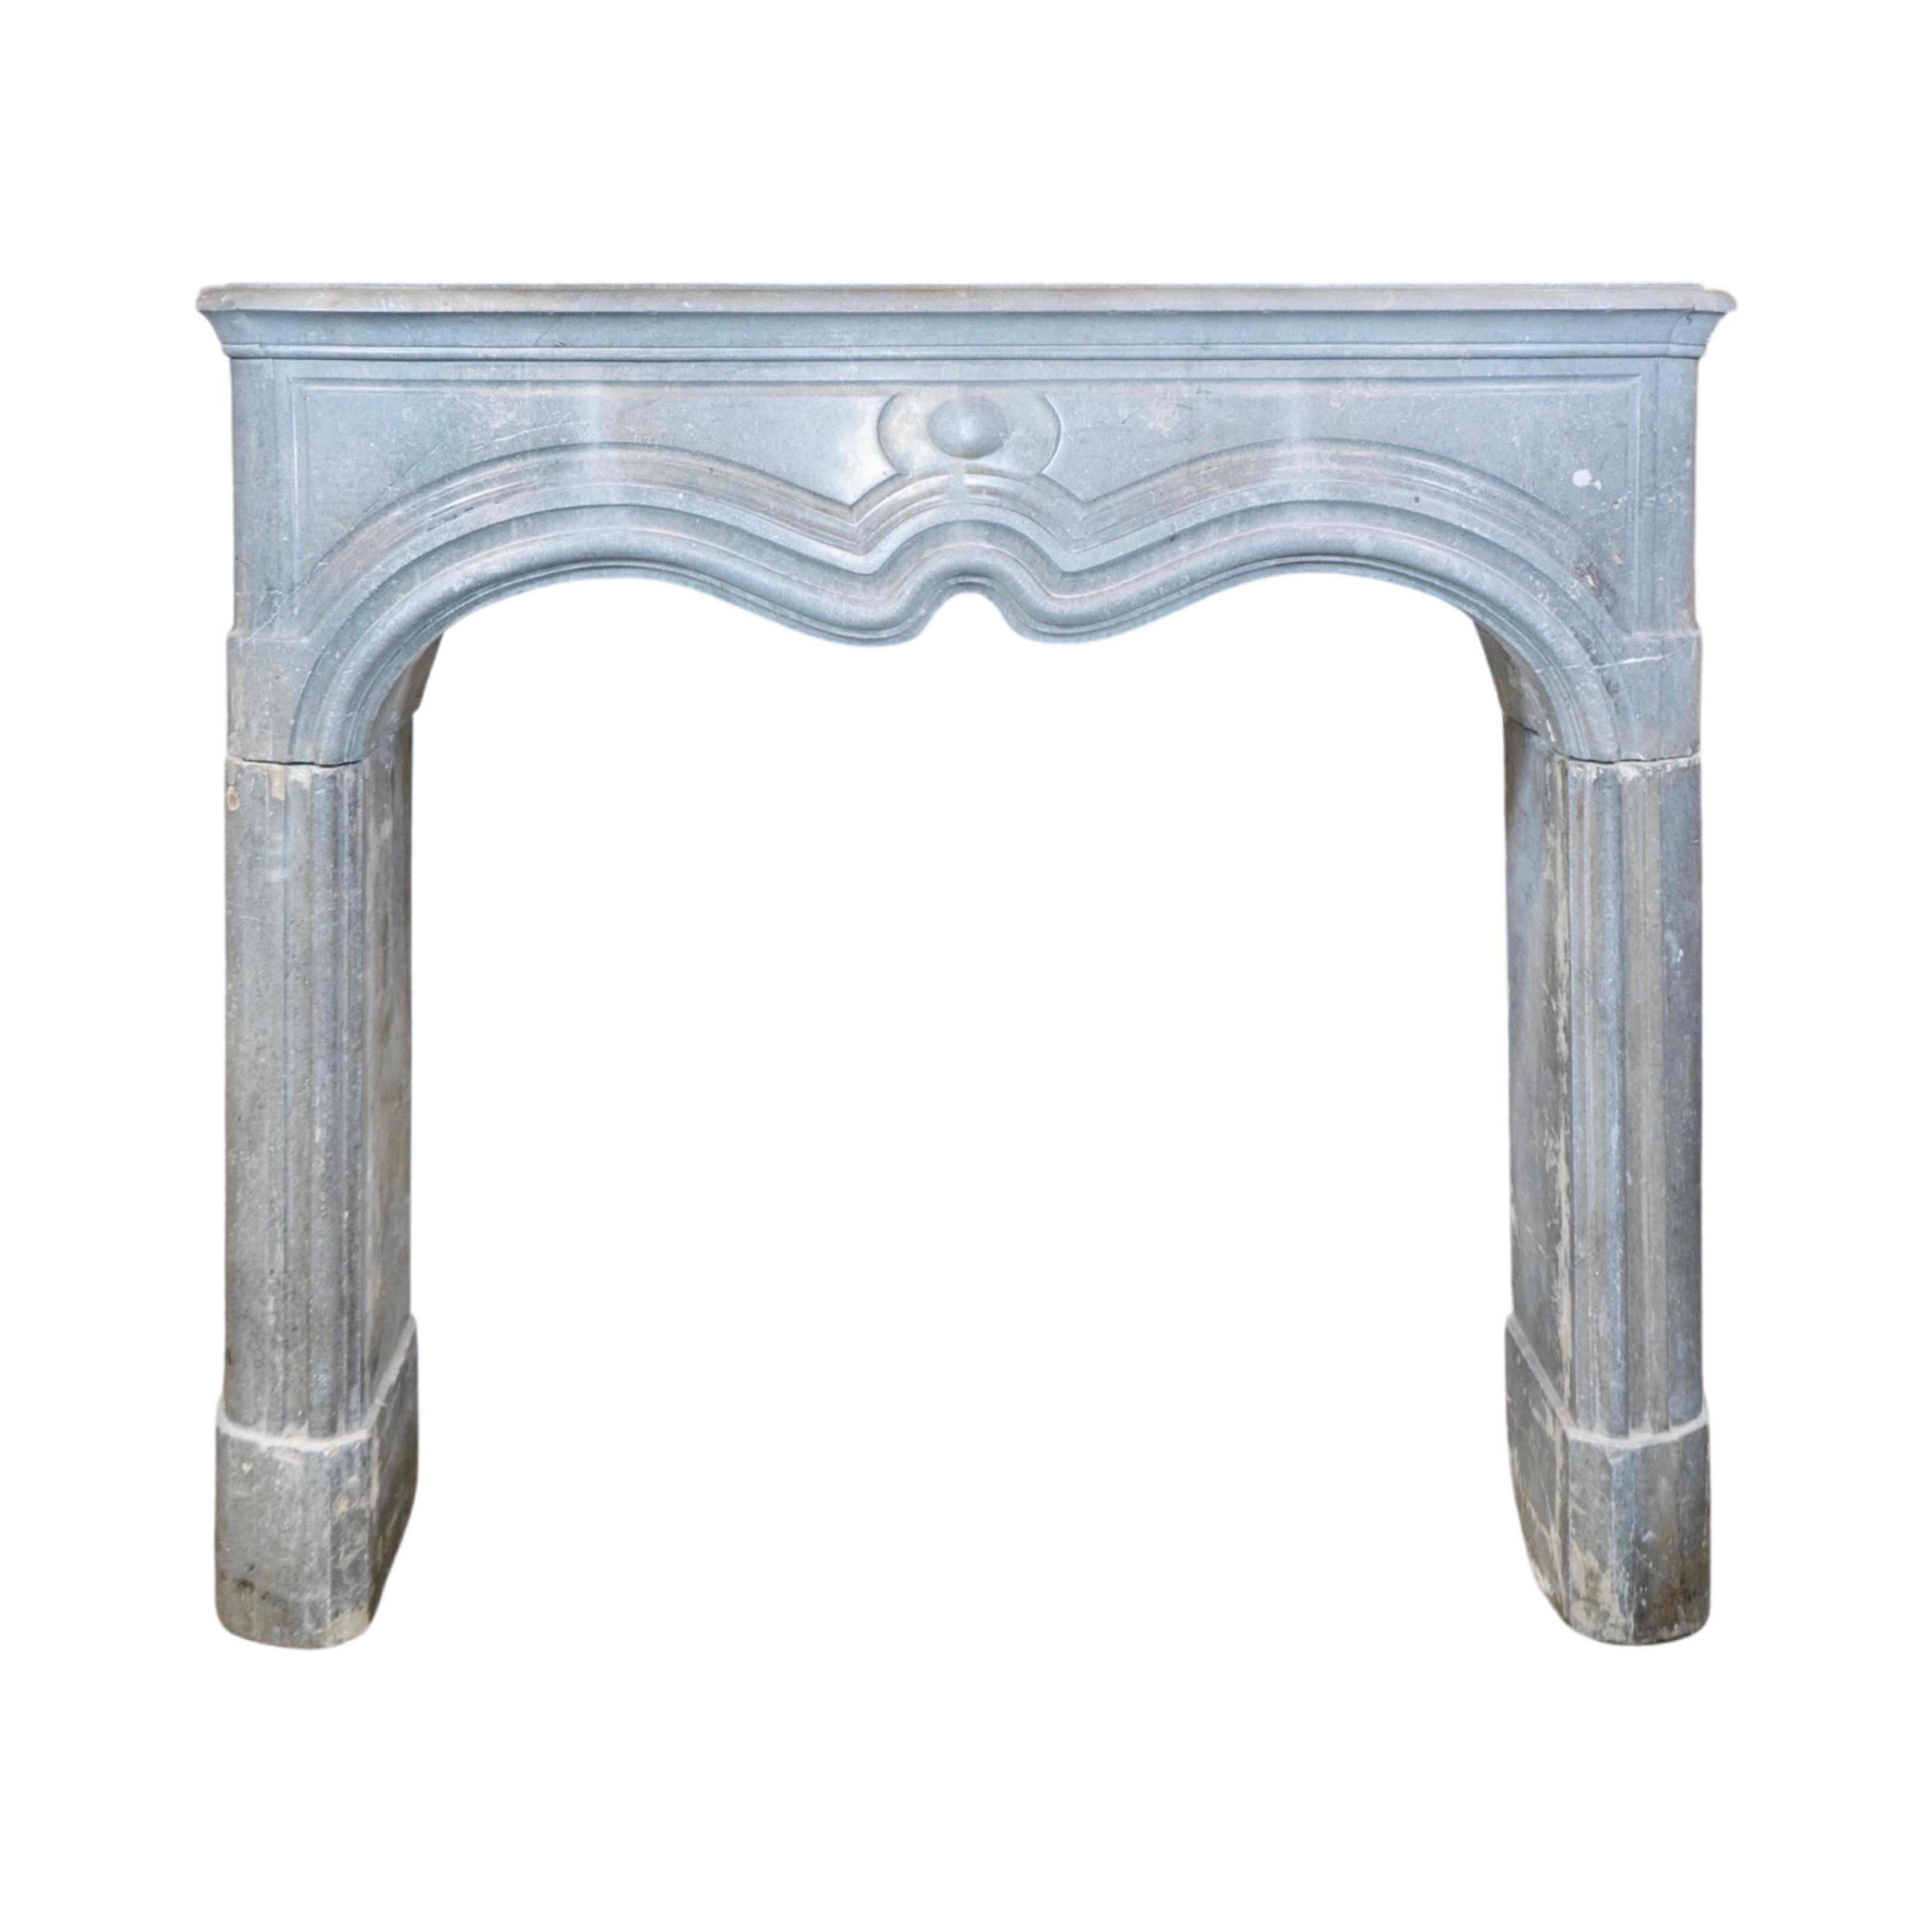 This elegant marble mantel is expertly crafted from Belgian limestone and boasts a polished Bluestone finish. Its intricate linework, inspired by the Louis XVI style, adds a touch of sophistication to any room. It originates from Belgium in the